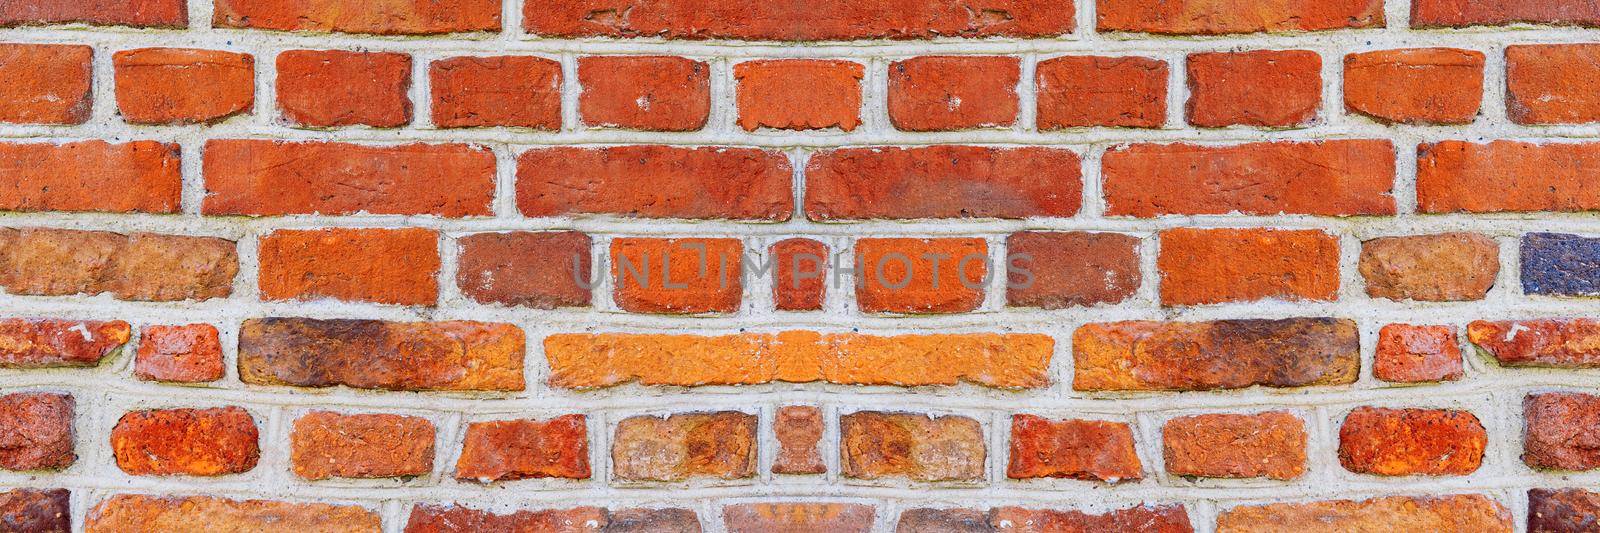 Background of old and rustic red brick wall by PhotoTime